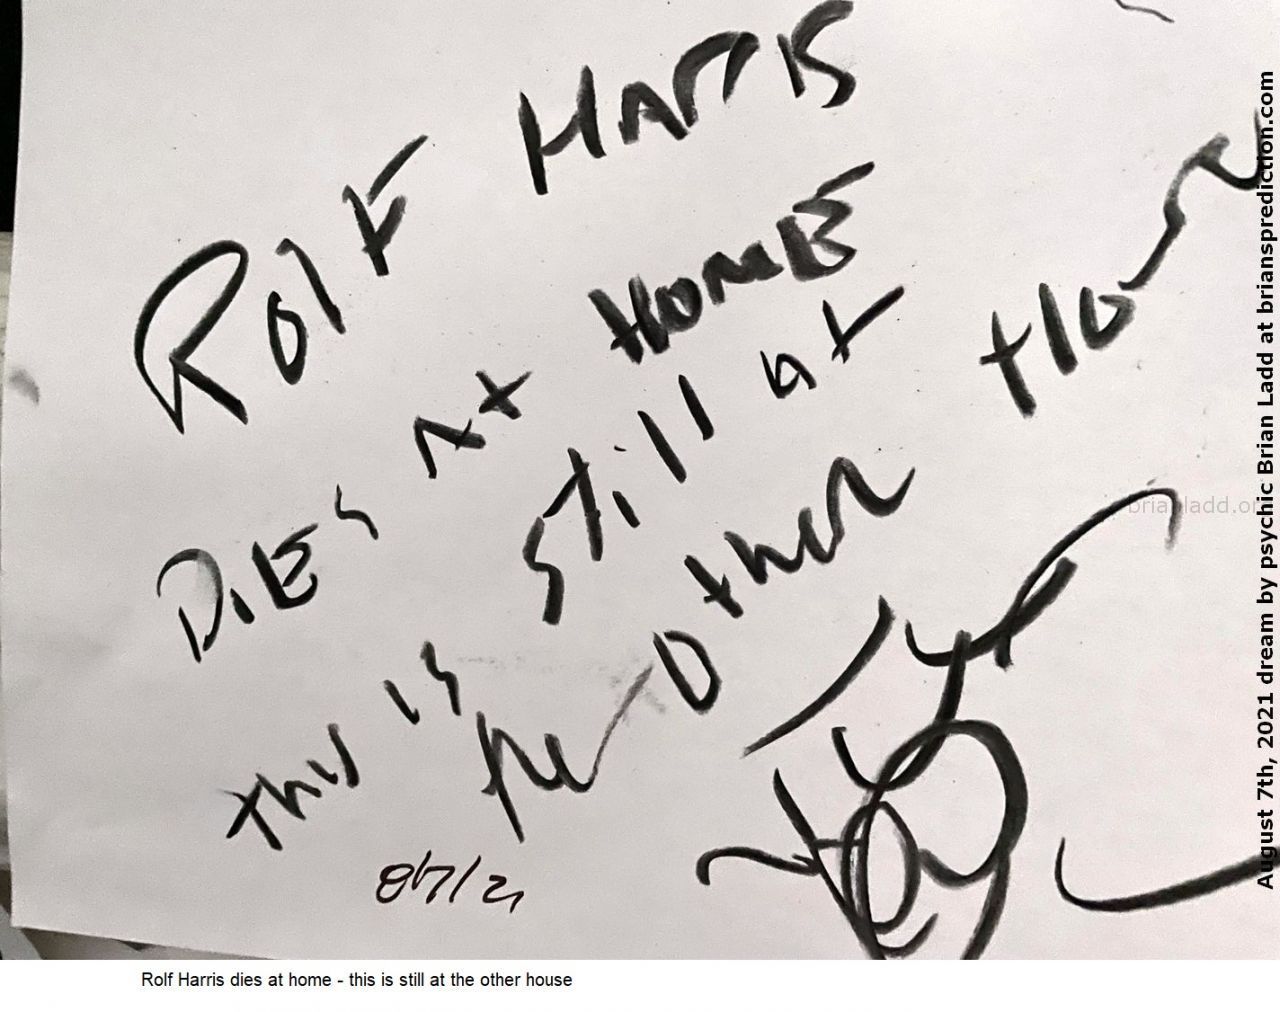 7 August 2021 4 Rolf Harris dies at home - this is still at the other house...
Rolf Harris dies at home - this is still at the other house.
